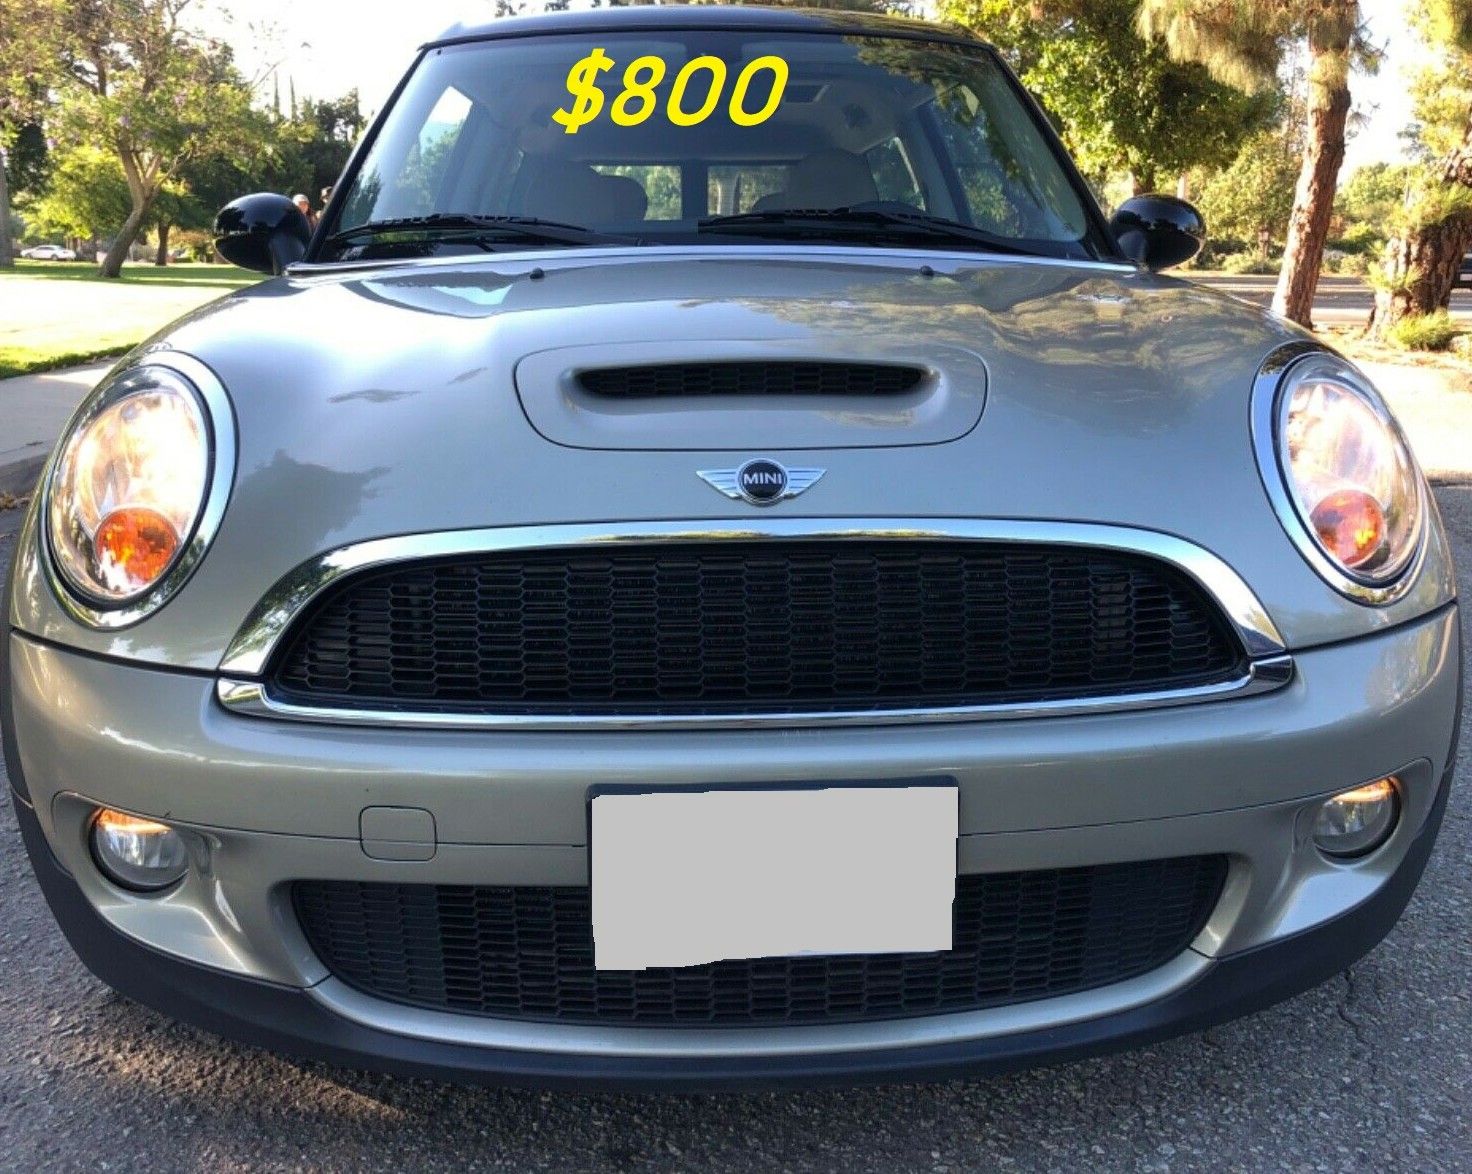 ❇️💲8OO For sale URGENTLY 2OO9 Mini cooper RUNS&DRIVE PERFECT This car is super clean in&out❇️